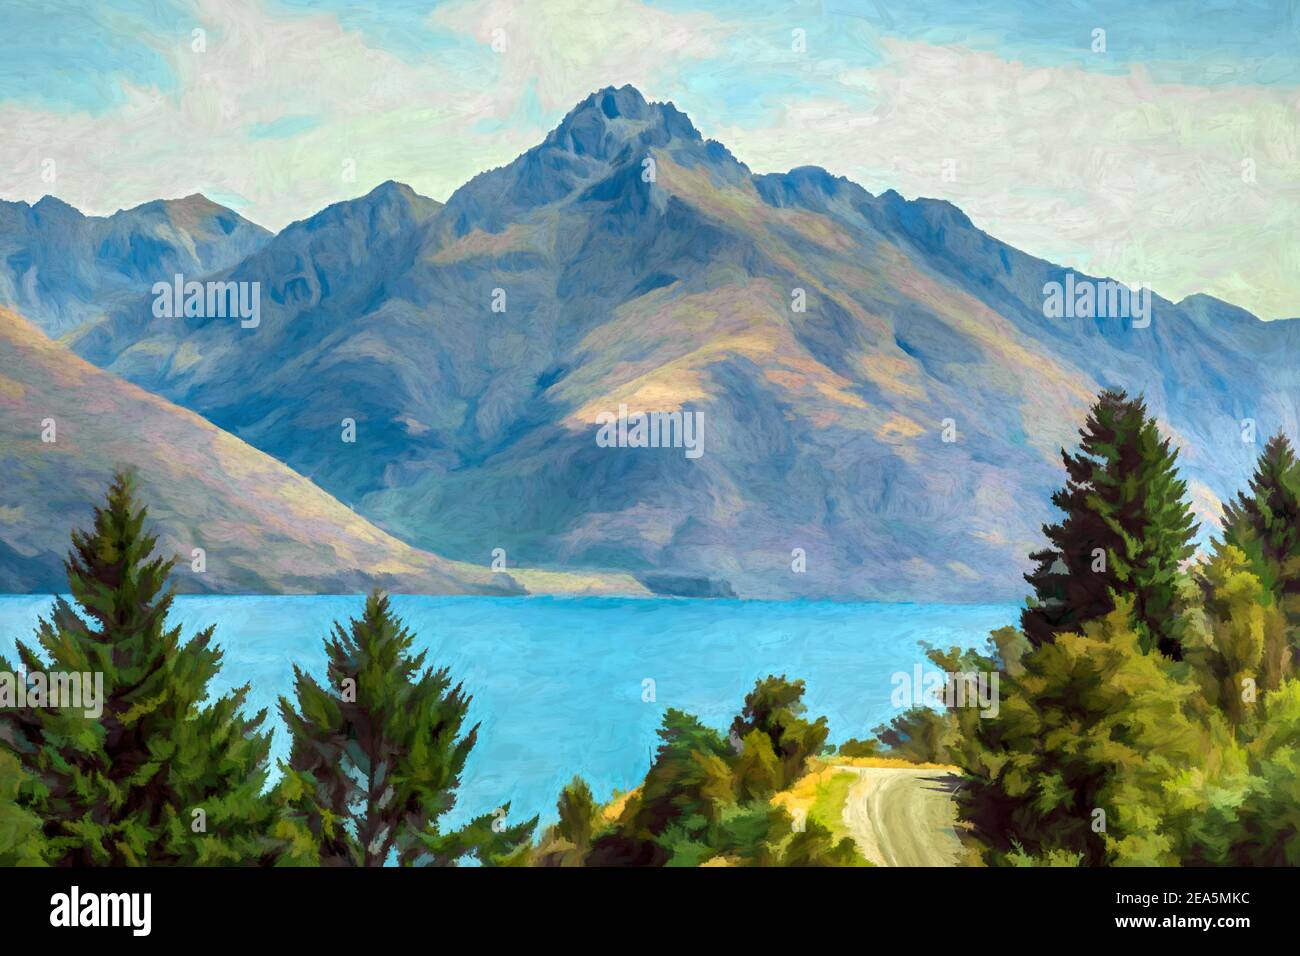 Digital painting of The Remarkables and Lake Wakatipu, Queenstown, New Zealand Stock Photo